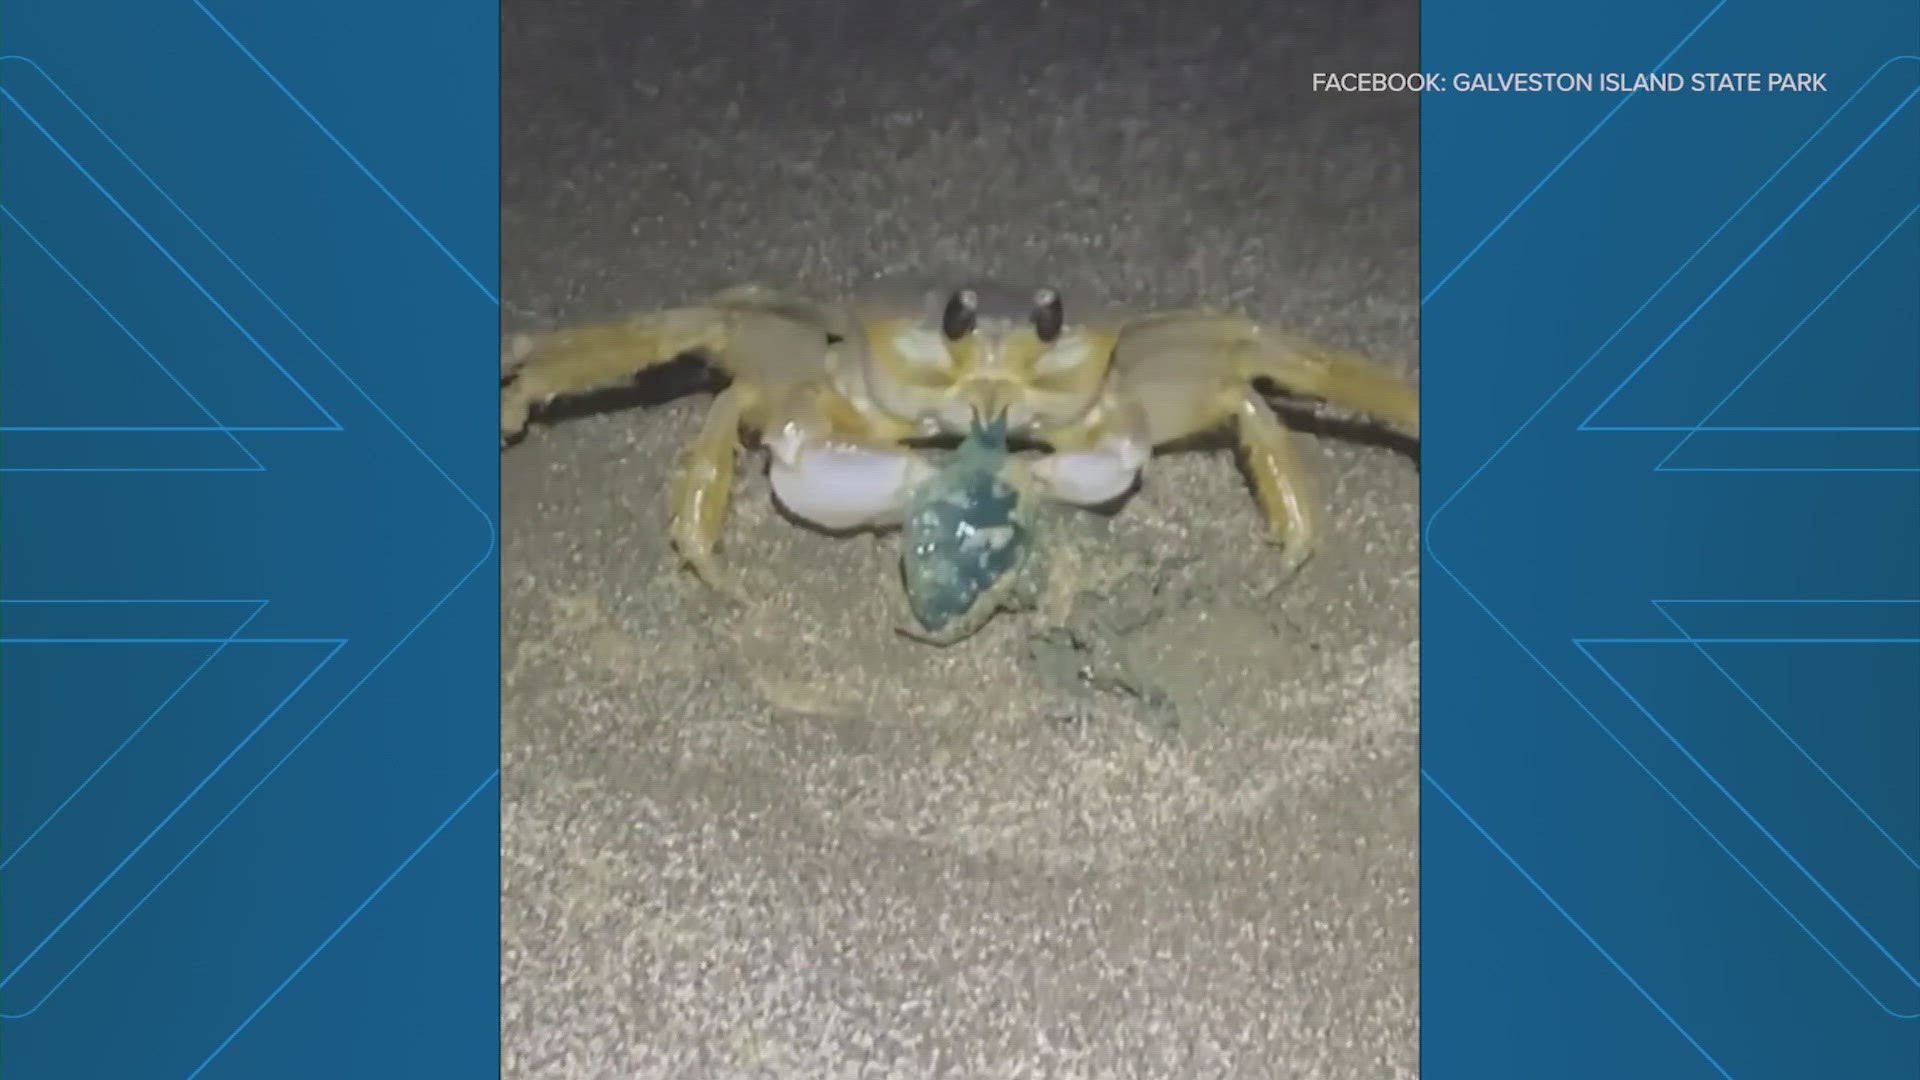 If you don't get stung, don't worry. The ghost crabs have your back!